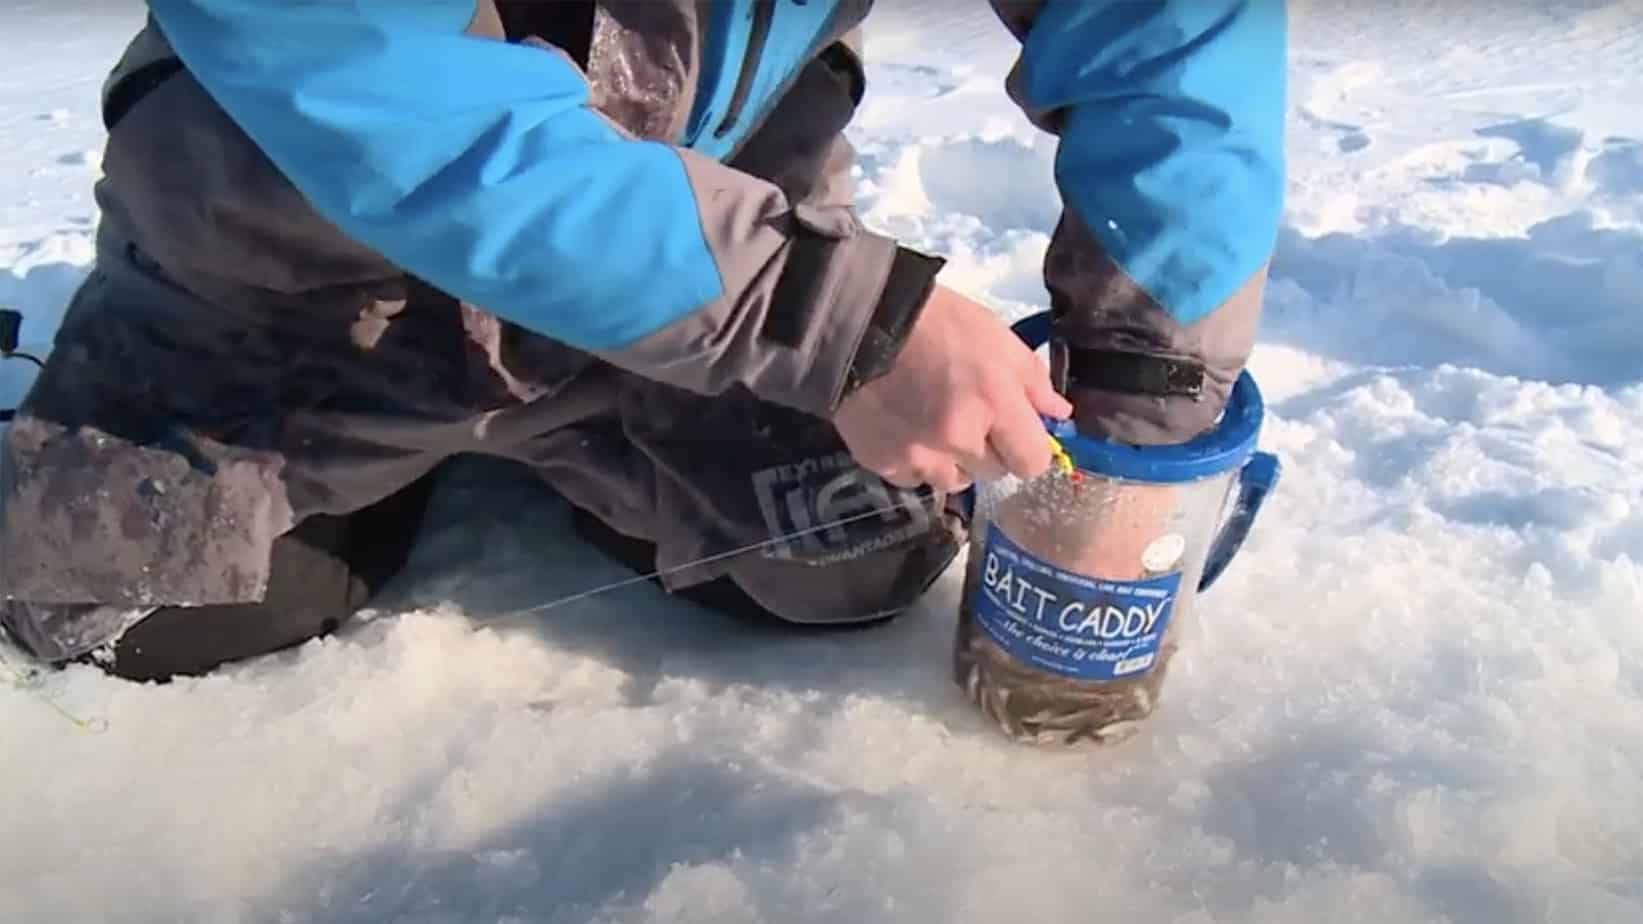 Live Bait Management Tips On Ice: Bait Caddy AnglingBuzz